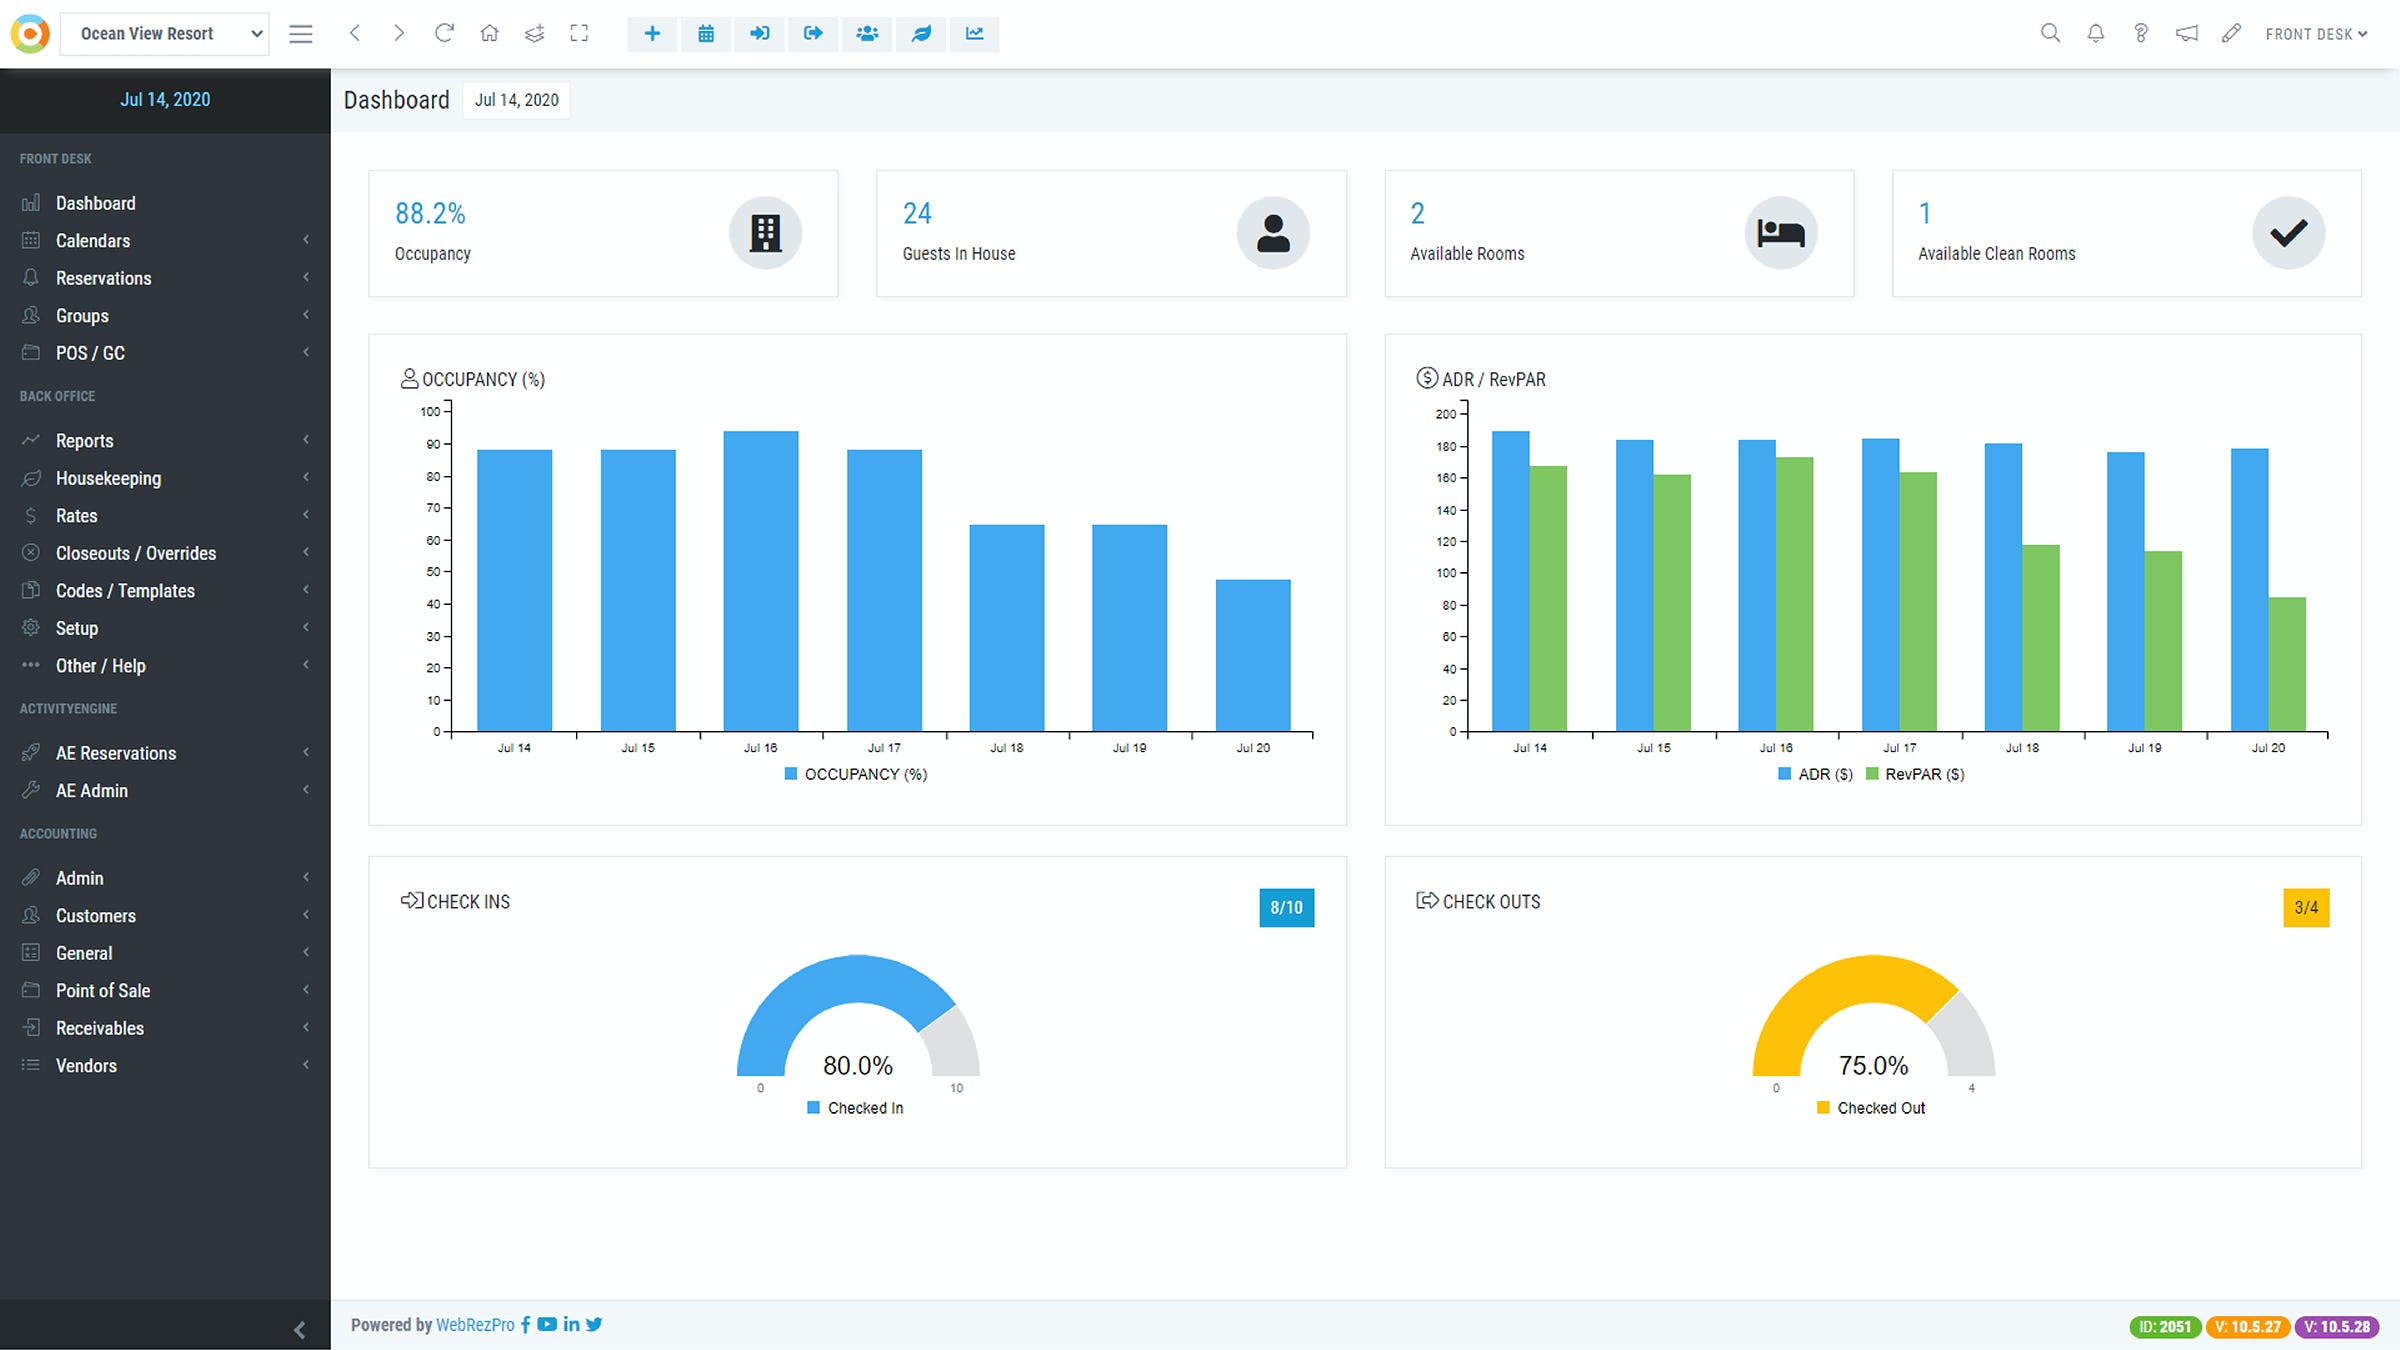 This image shows the WebRezPro user dashboard